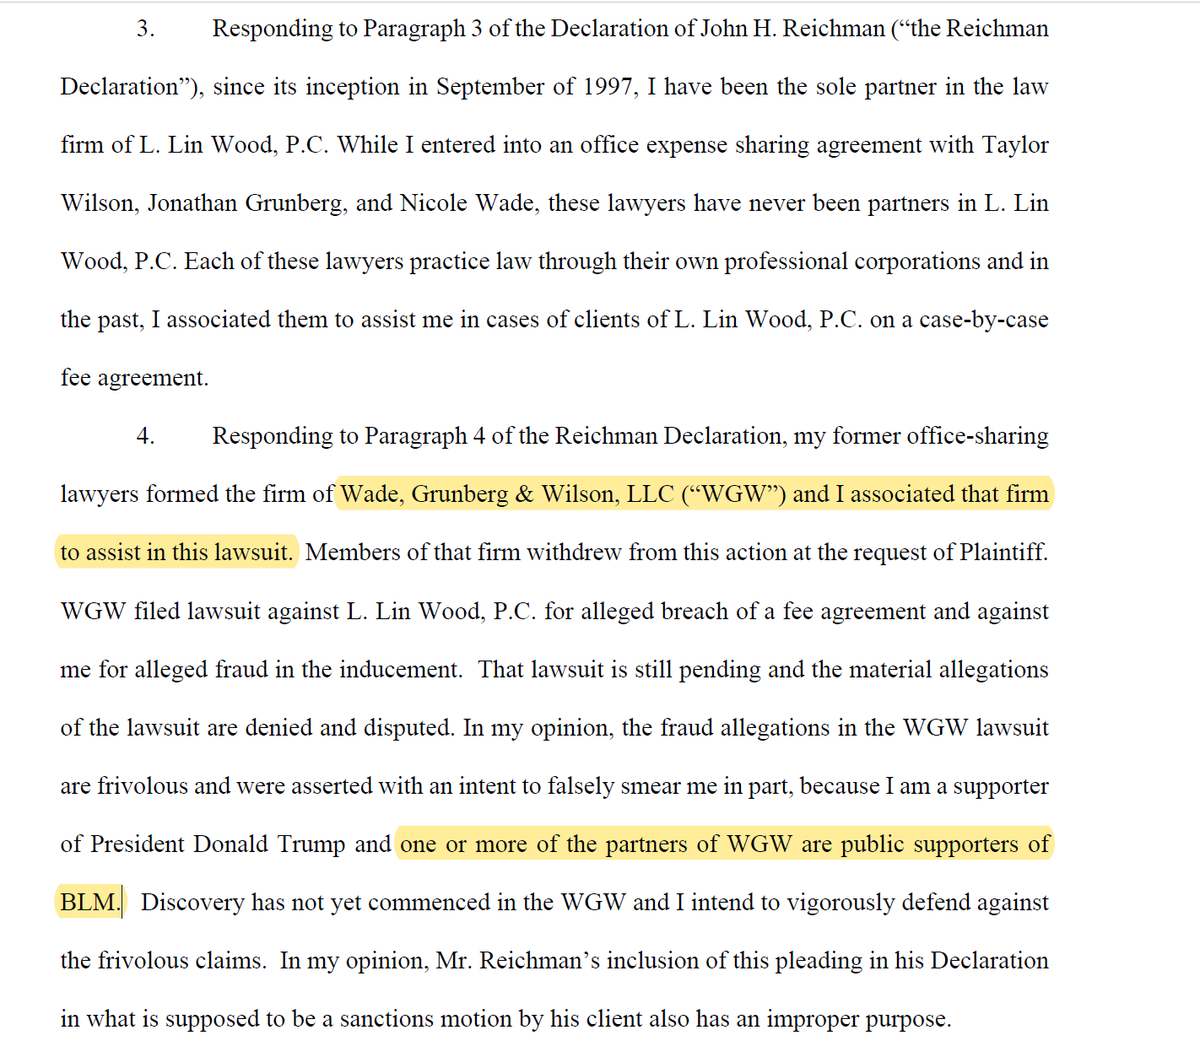 Paragraph 4 strikes me as potentially problematic, given the signature block in the linked filing from earlier in this case - Wilson isn't identifying himself as being with a separate firm, and has an email address associated with Lin's firm, not his own.  https://www.courtlistener.com/recap/gov.uscourts.nyed.422819/gov.uscourts.nyed.422819.25.0_1.pdf